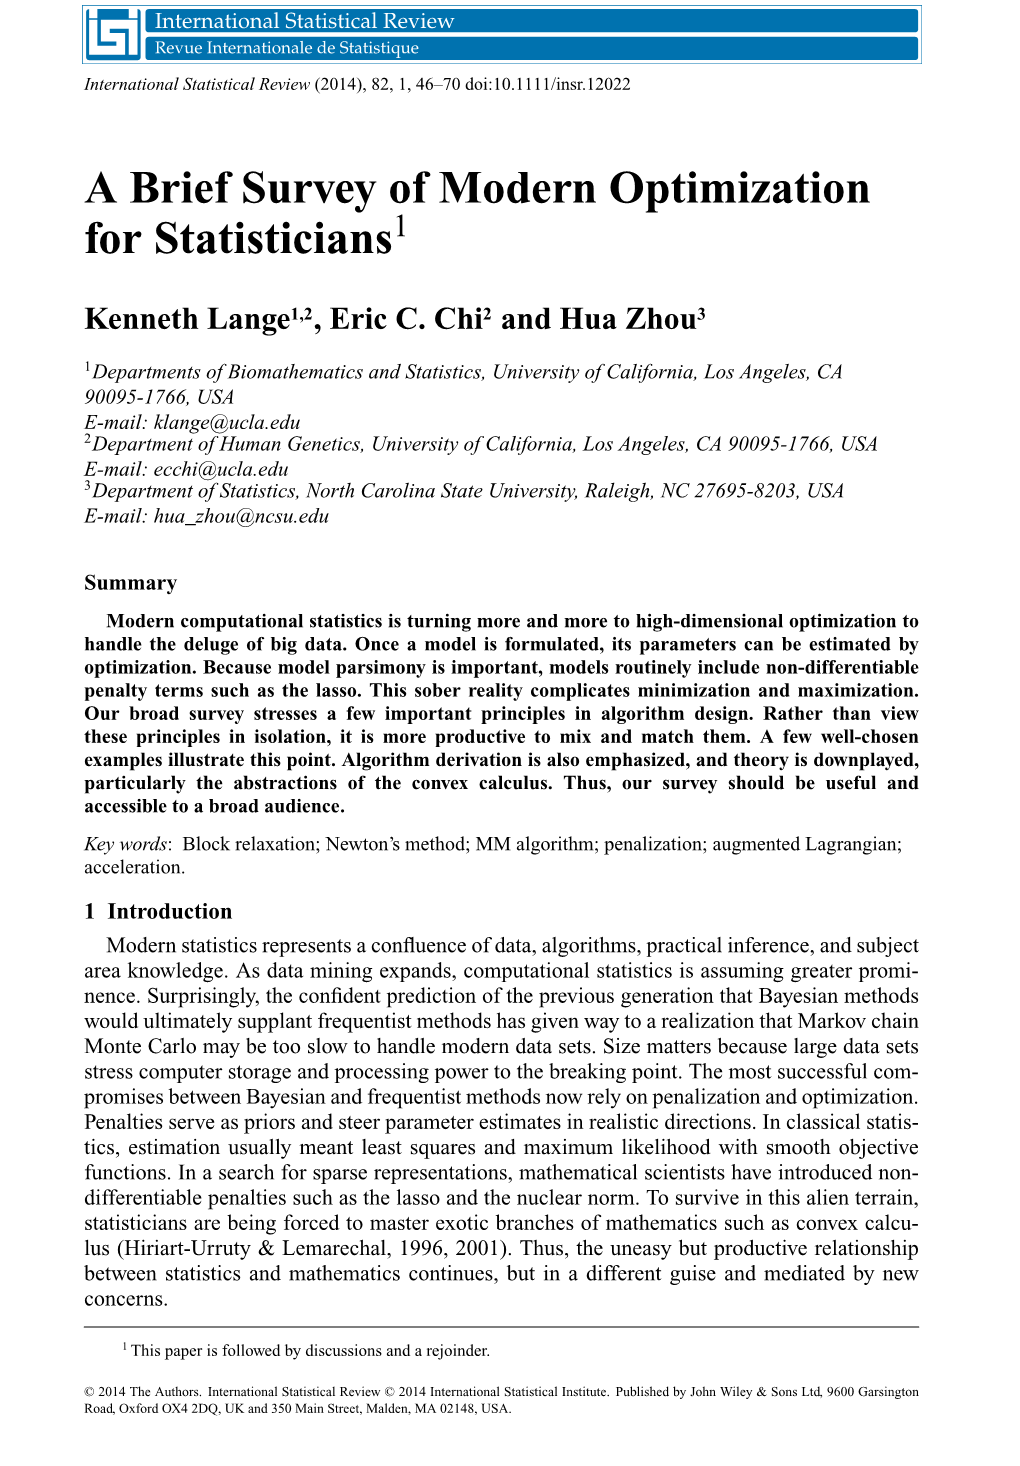 A Brief Survey of Modern Optimization for Statisticians1